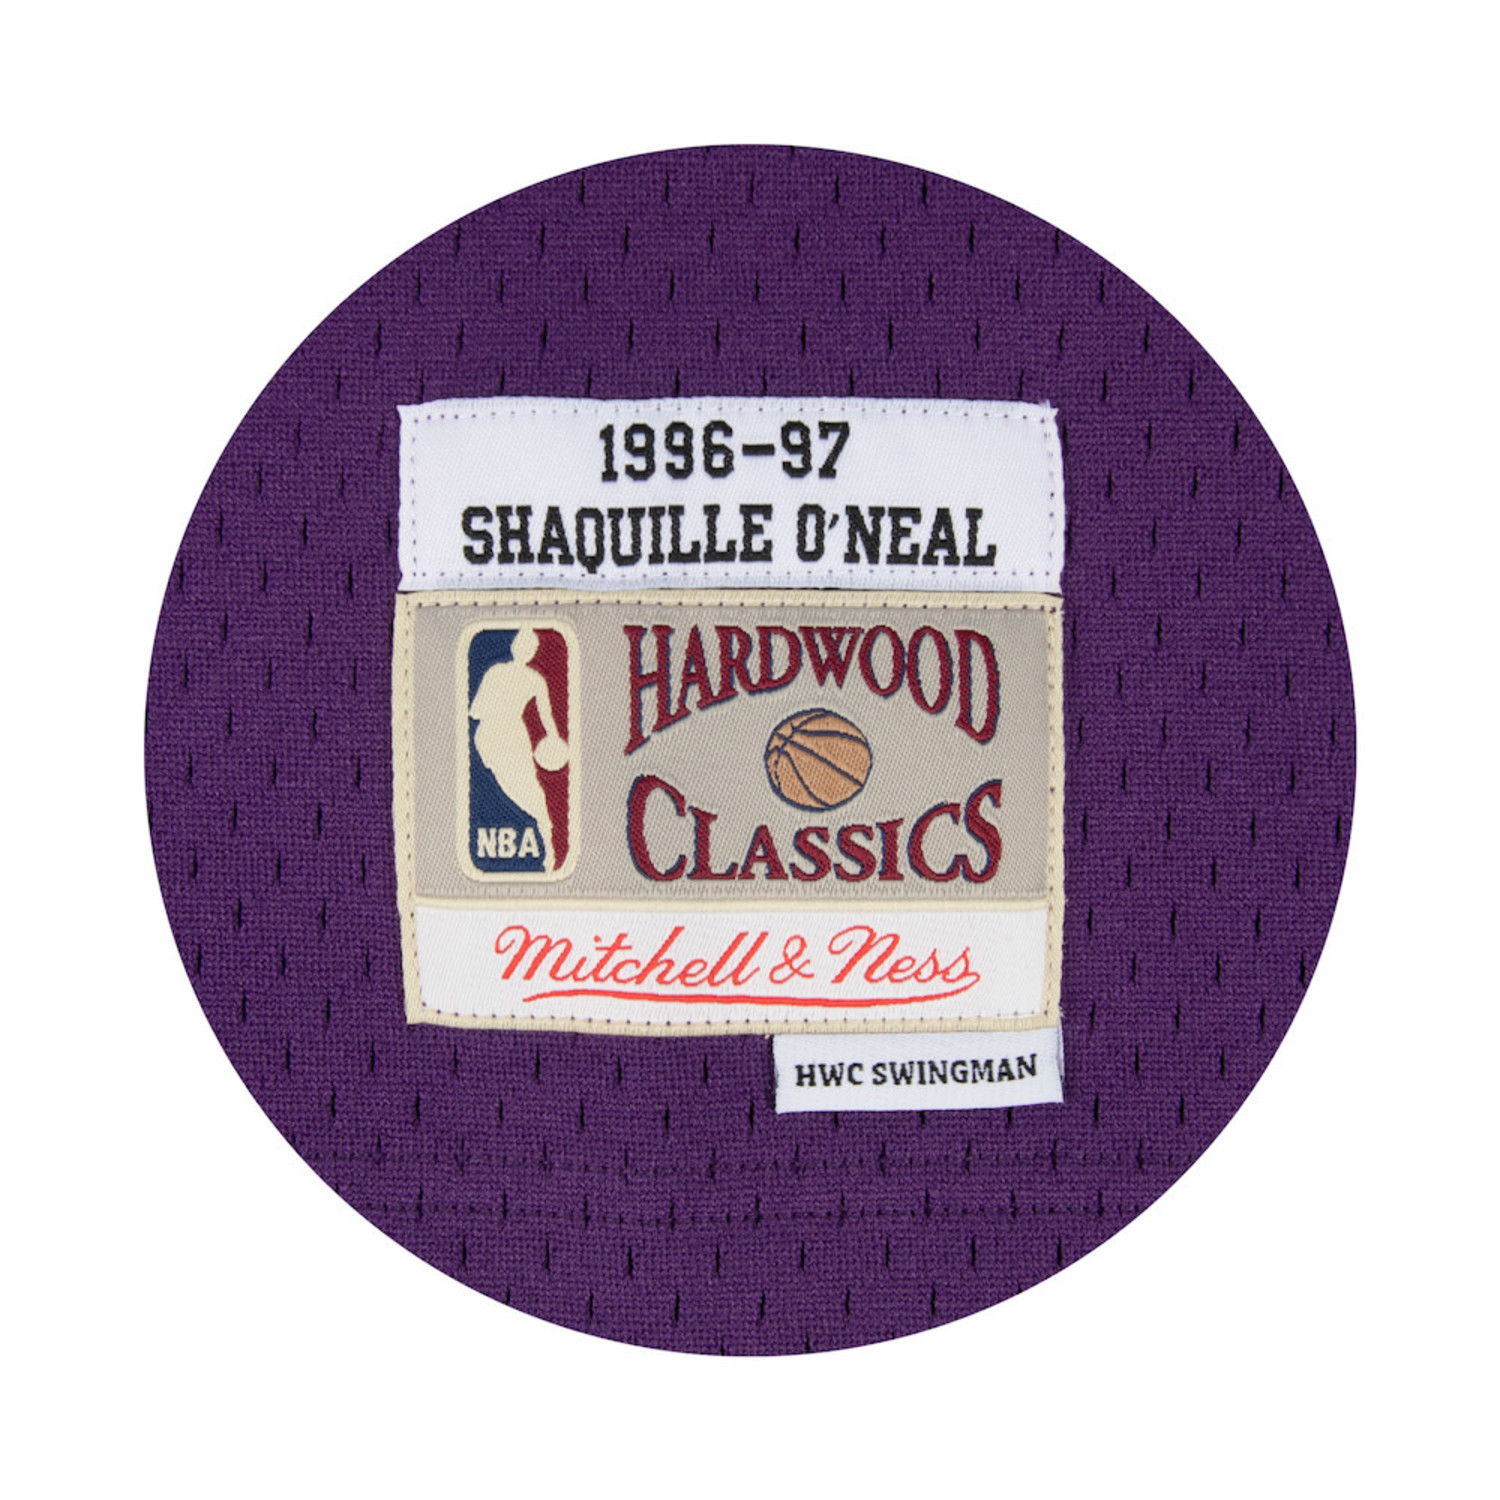 Mitchell and Ness LA Lakers Men's Mitchell & Ness 1996-97 Shaquille O'Neal  #34 Replica Swingman Jersey Gold